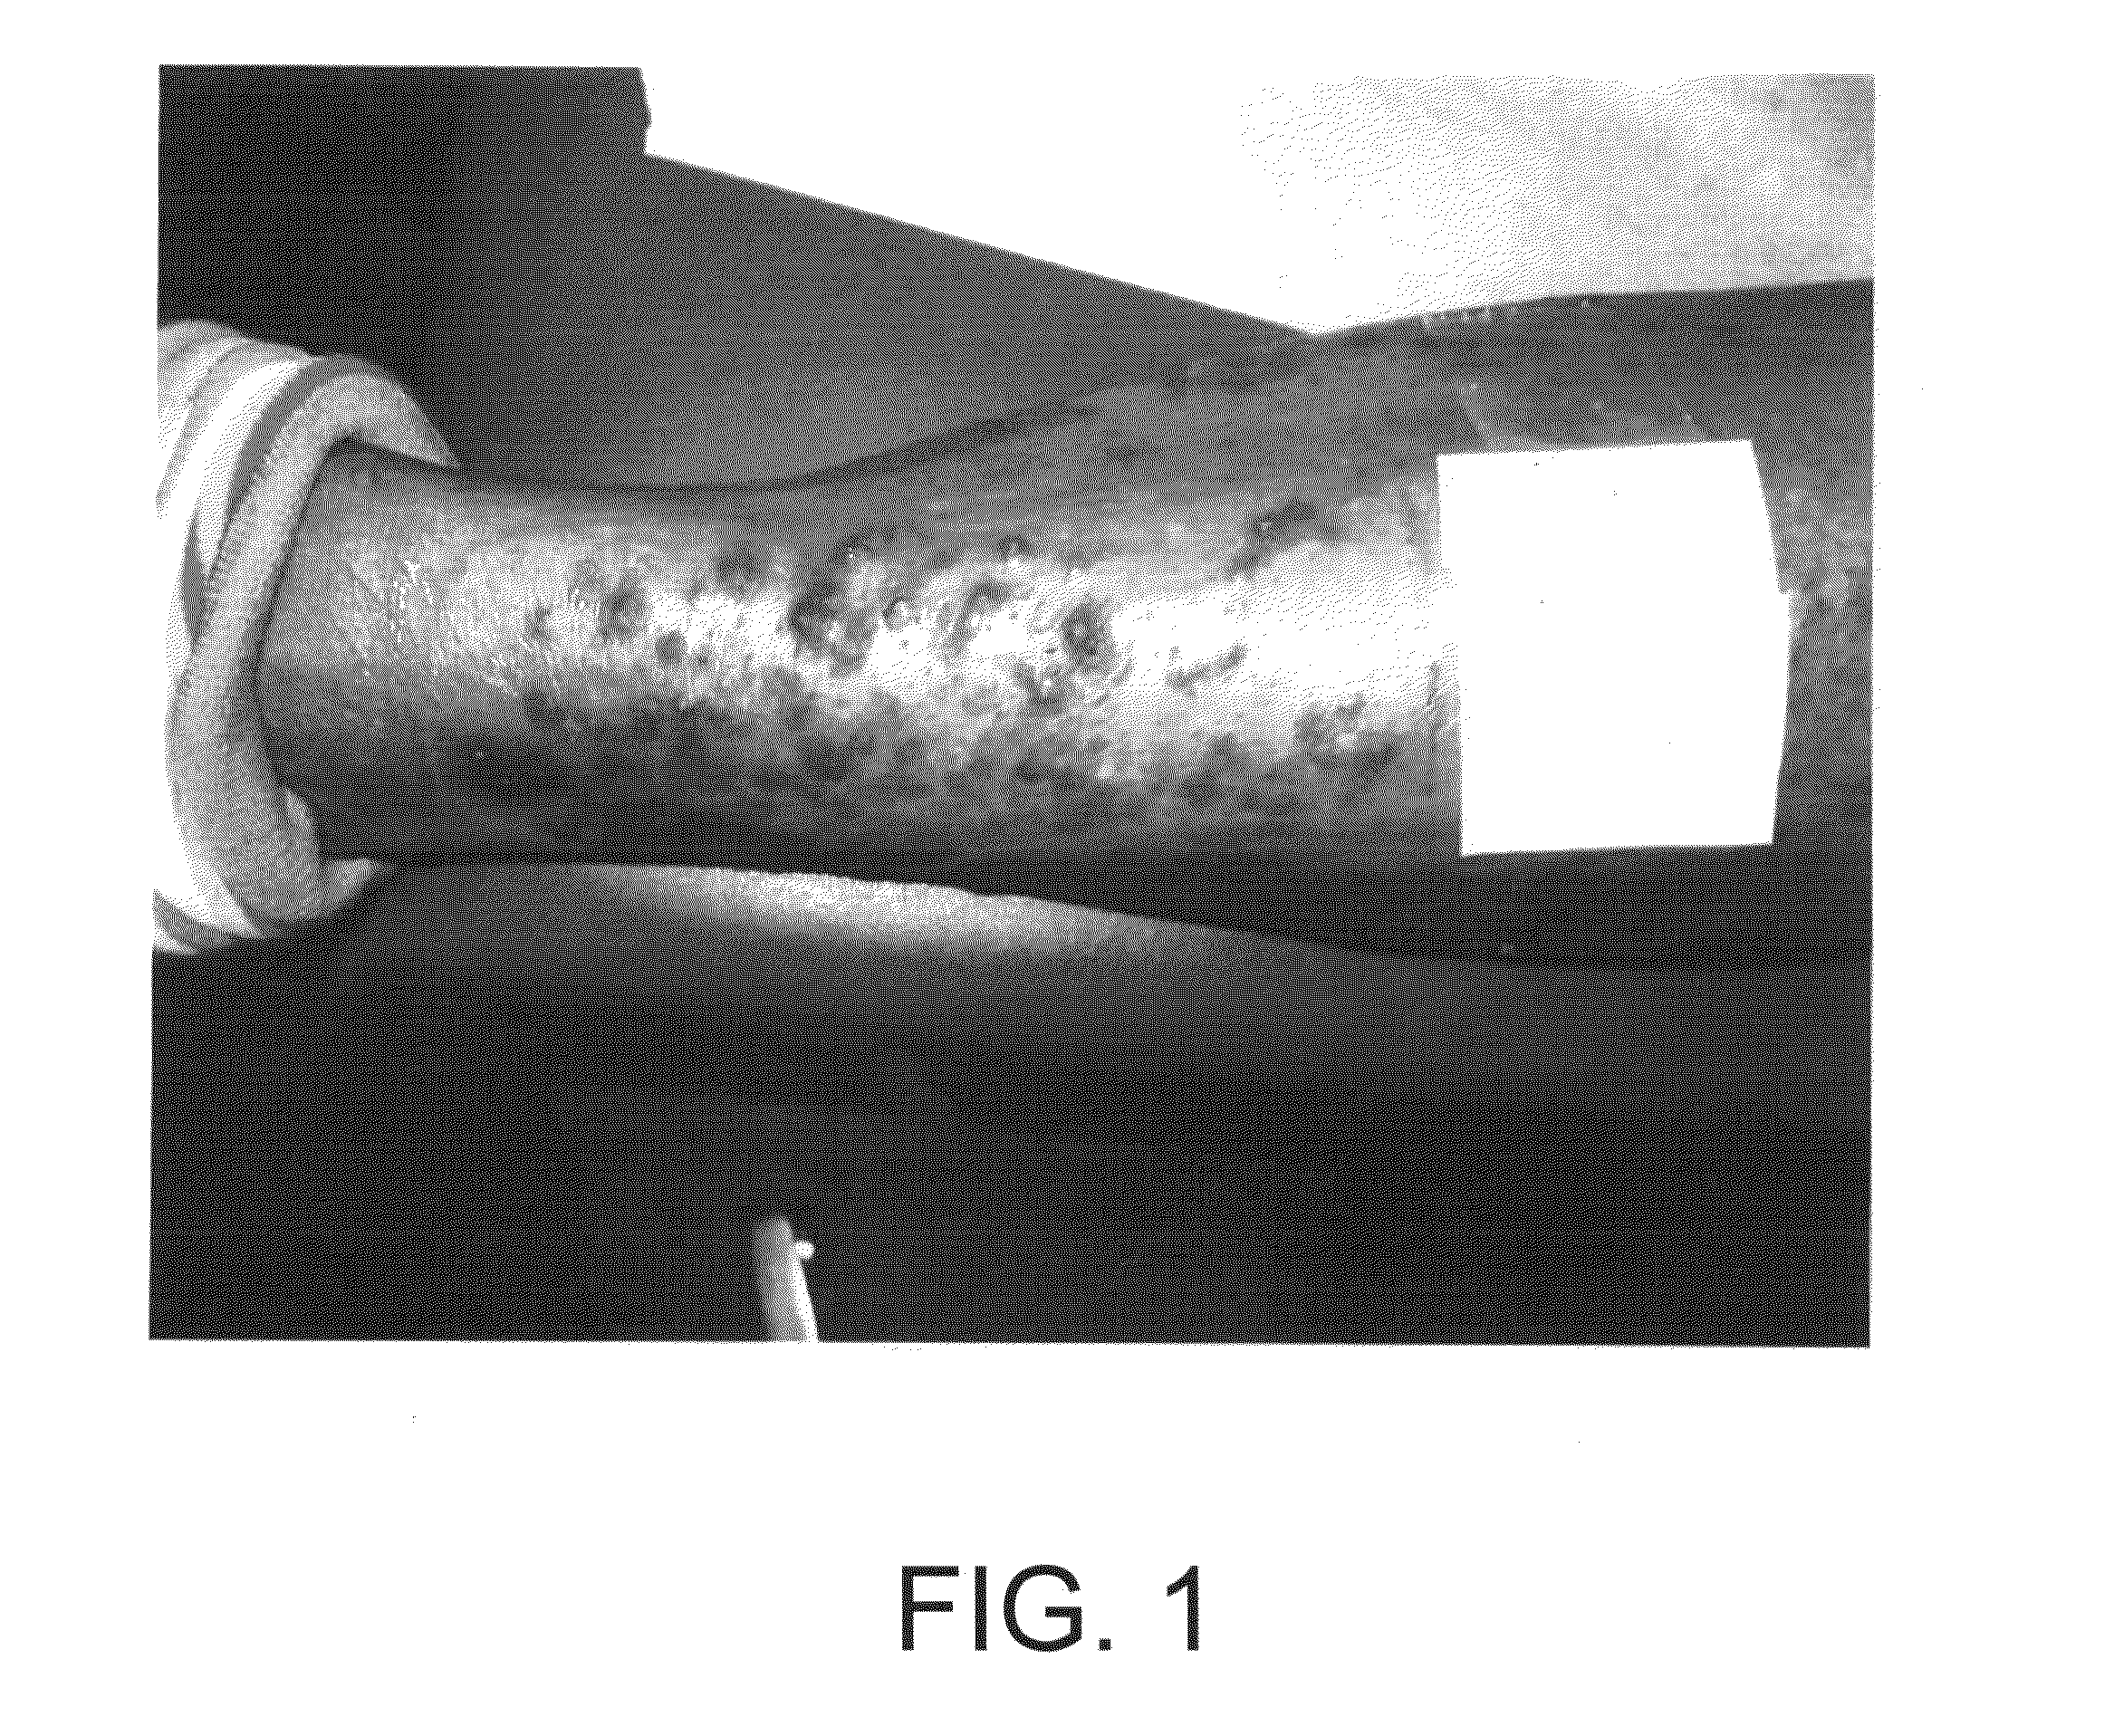 Method of treating acquired perforating dermatosis with cantharidin